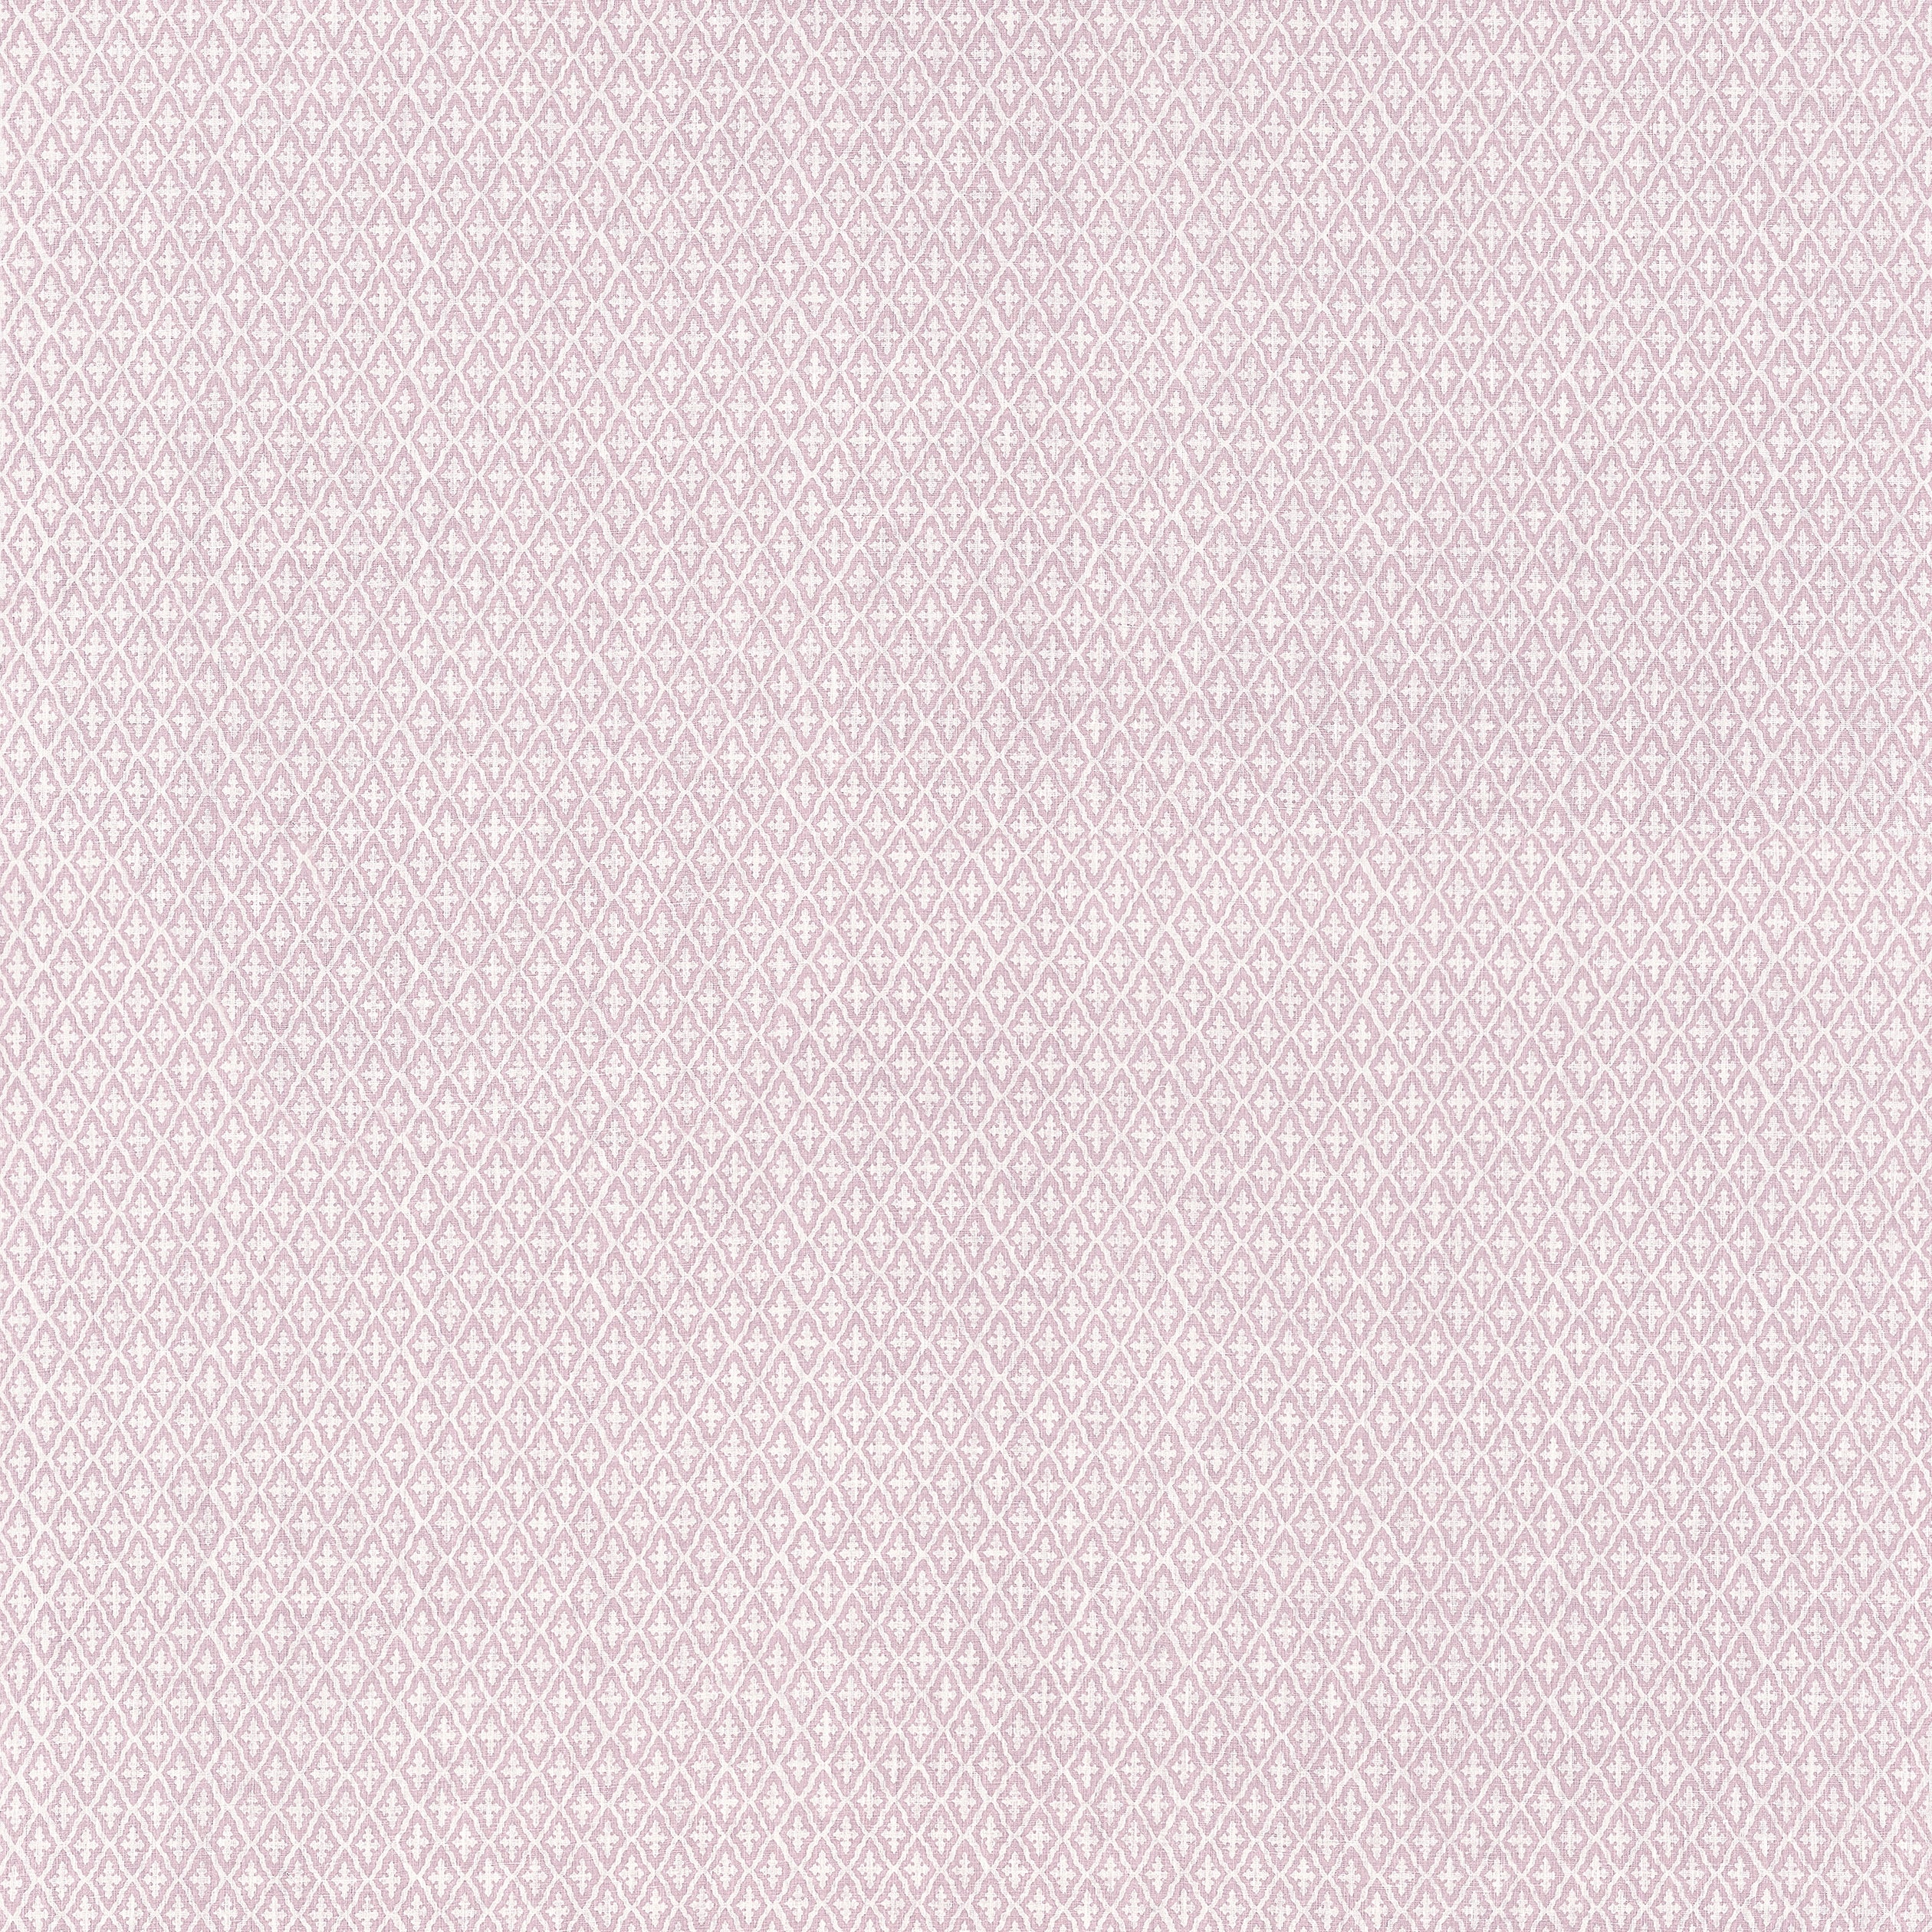 Lindsey fabric in lavender color - pattern number AF57811 - by Anna French in the Bristol collection